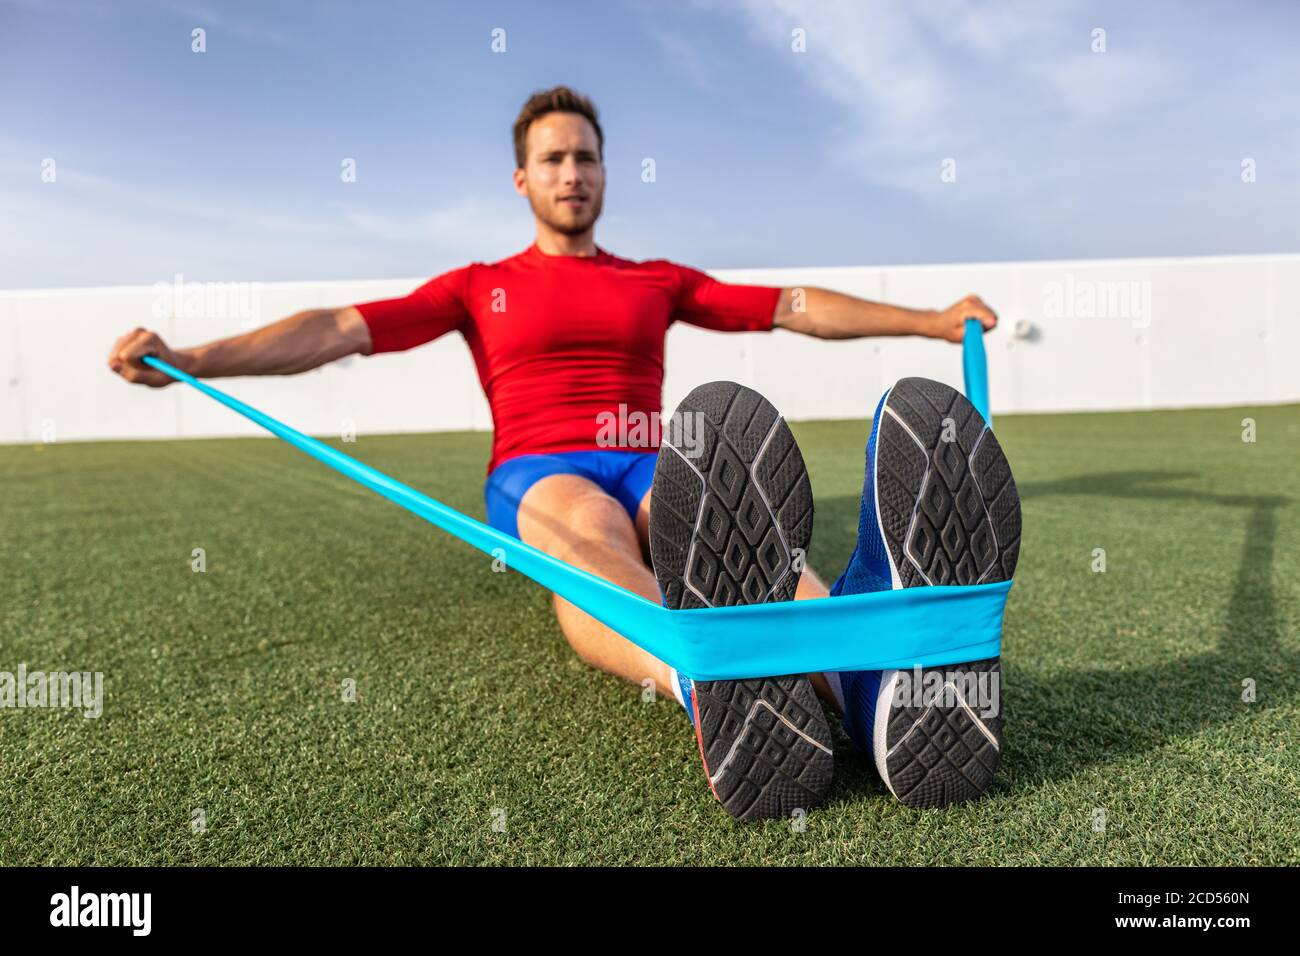 Fitness man training arms with resistance bands at outdoor gym or home garden. Body workout with equipment outside. Elastic rubber band accessory Stock Photo